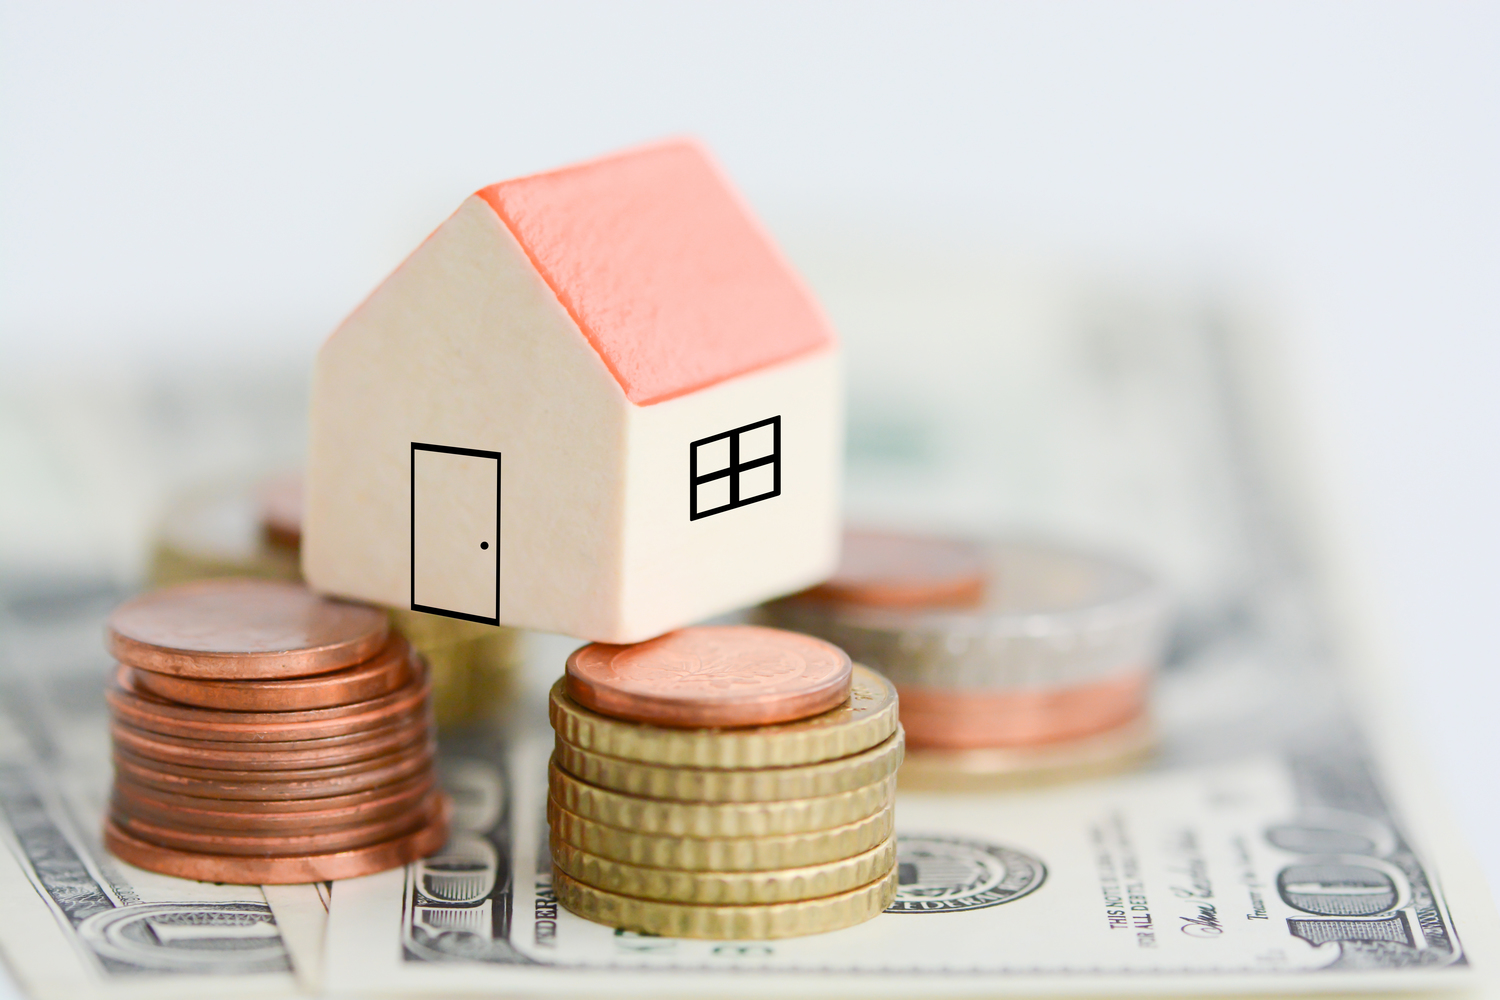 Home Construction Loan – What Is It and How Do You Qualify For It?